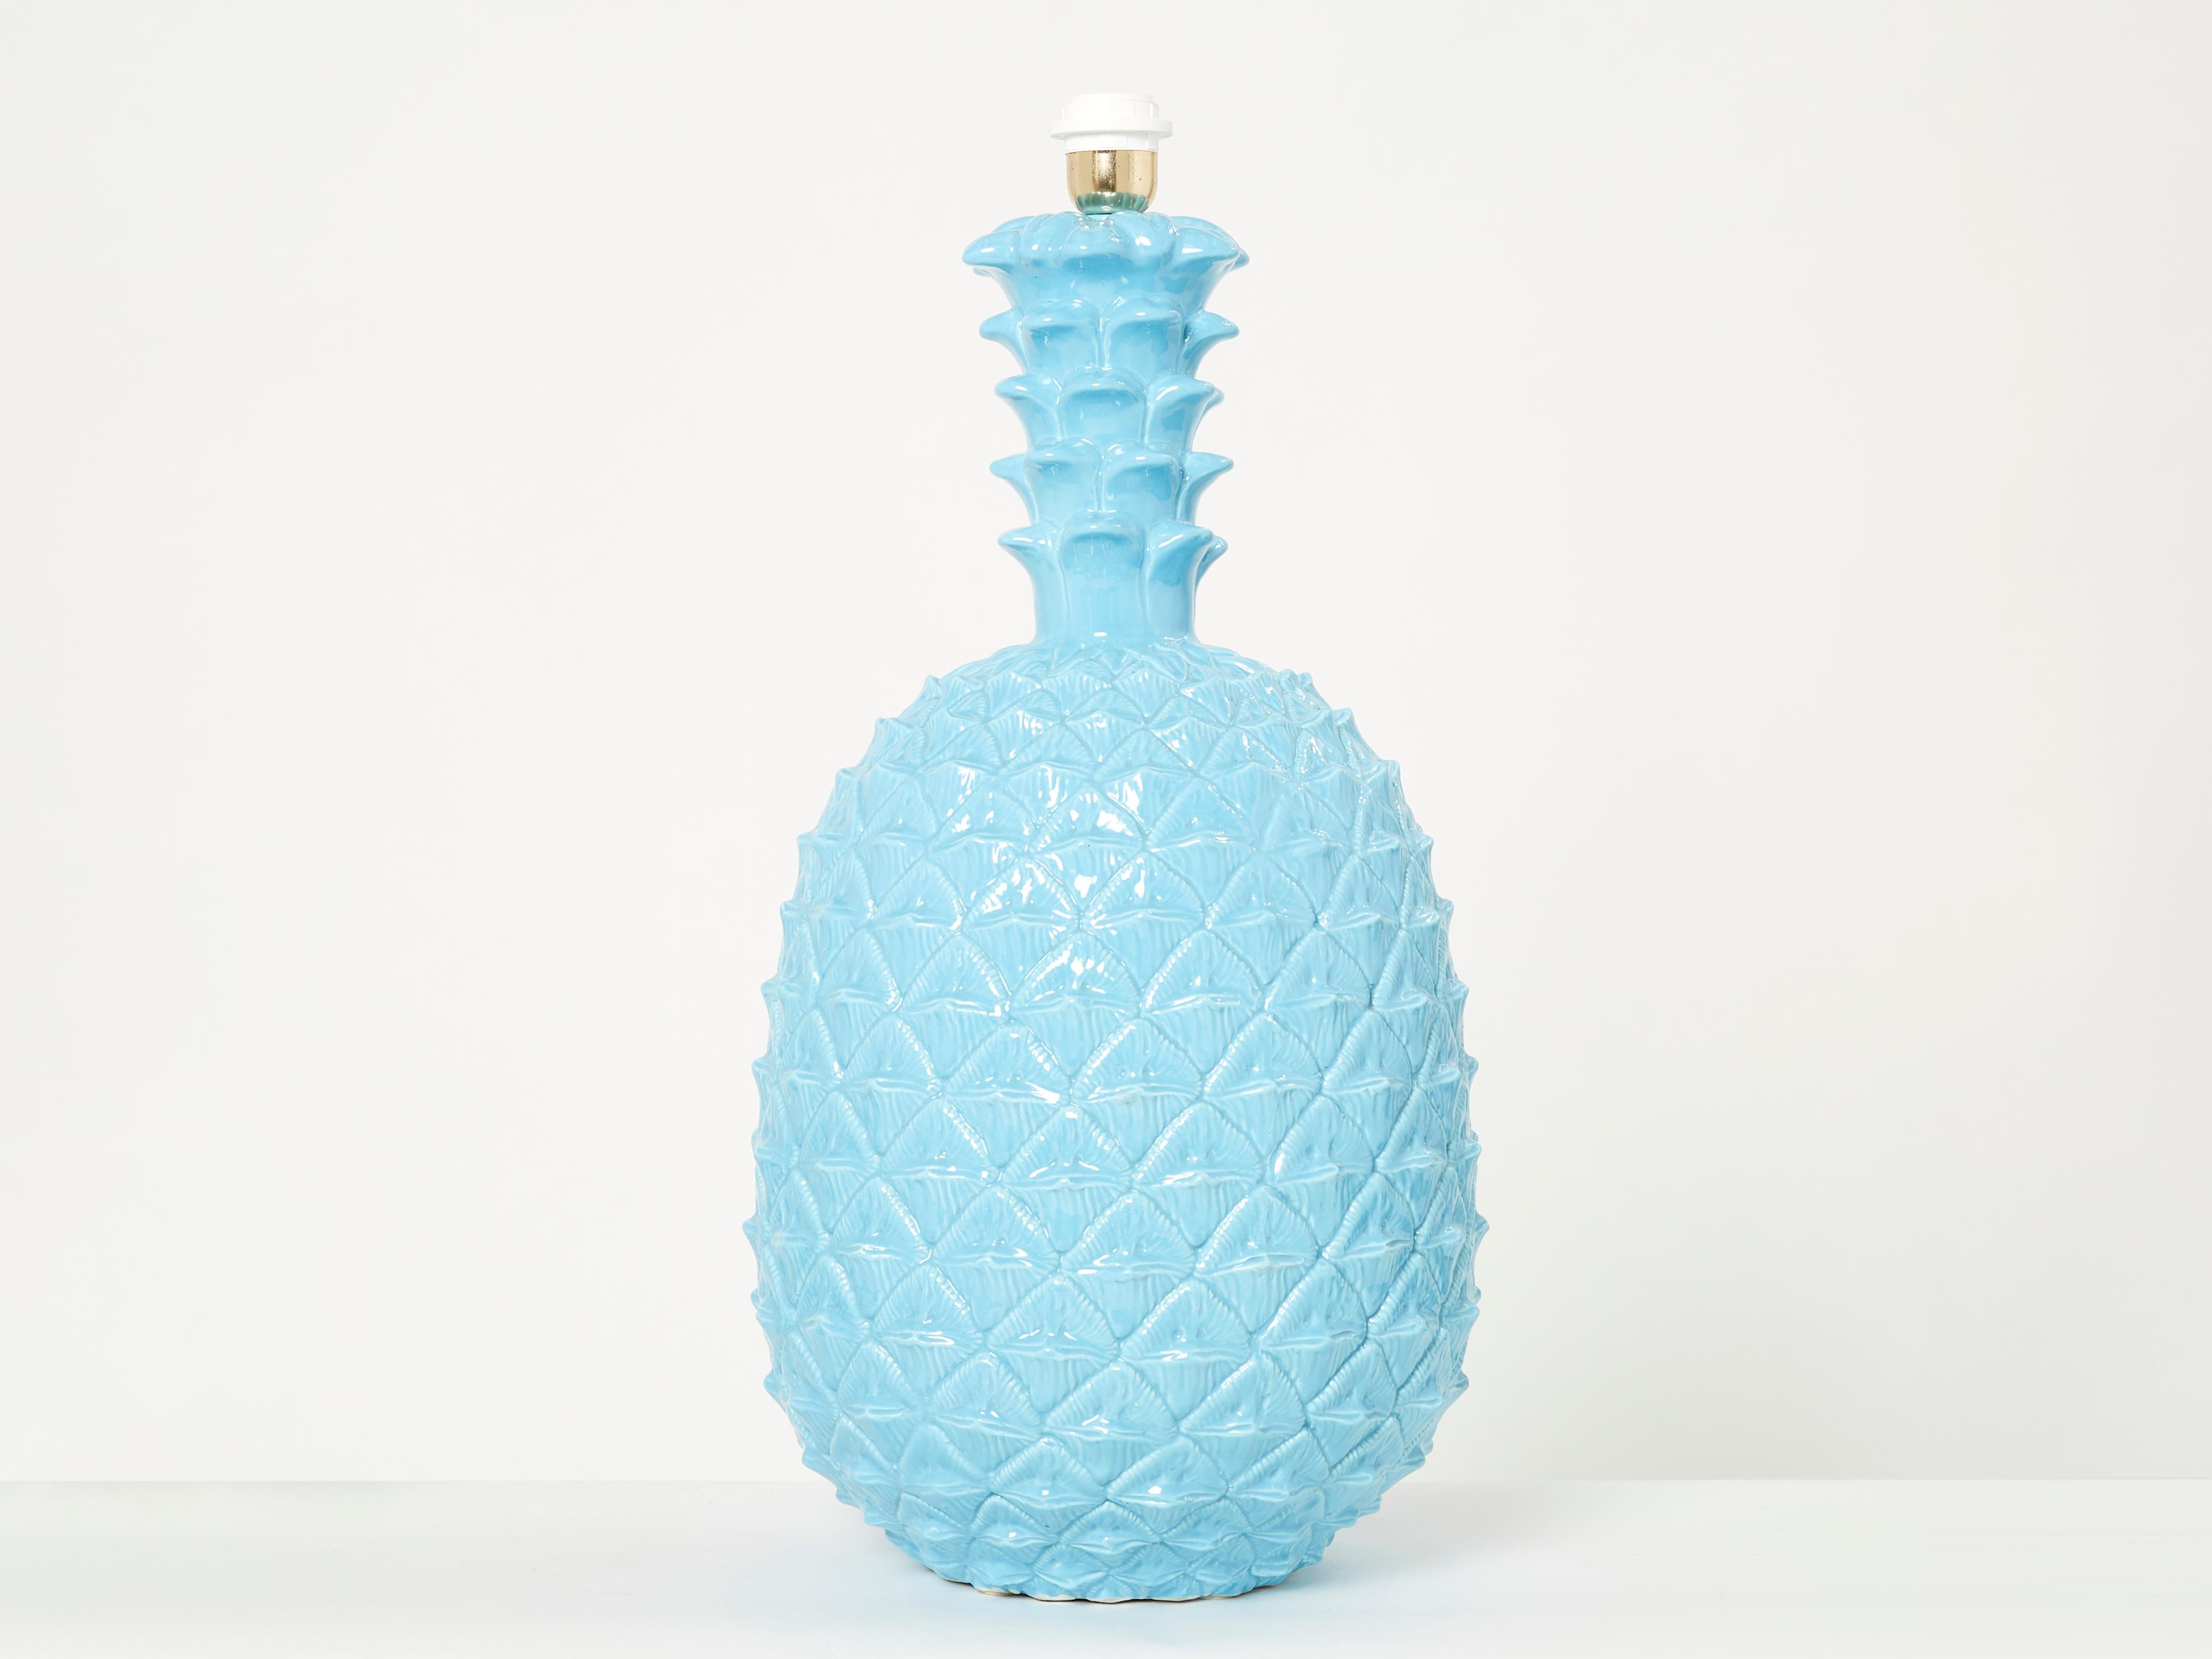 Beautiful XL Italian pineapple blue ceramic lamp by Tommaso Barbi made in the late 1970s. This table lamp boasts the exquisite craftsmanship characteristic of mid-century Italian ceramics by Barbi. Found in great vintage condition, this lamp comes